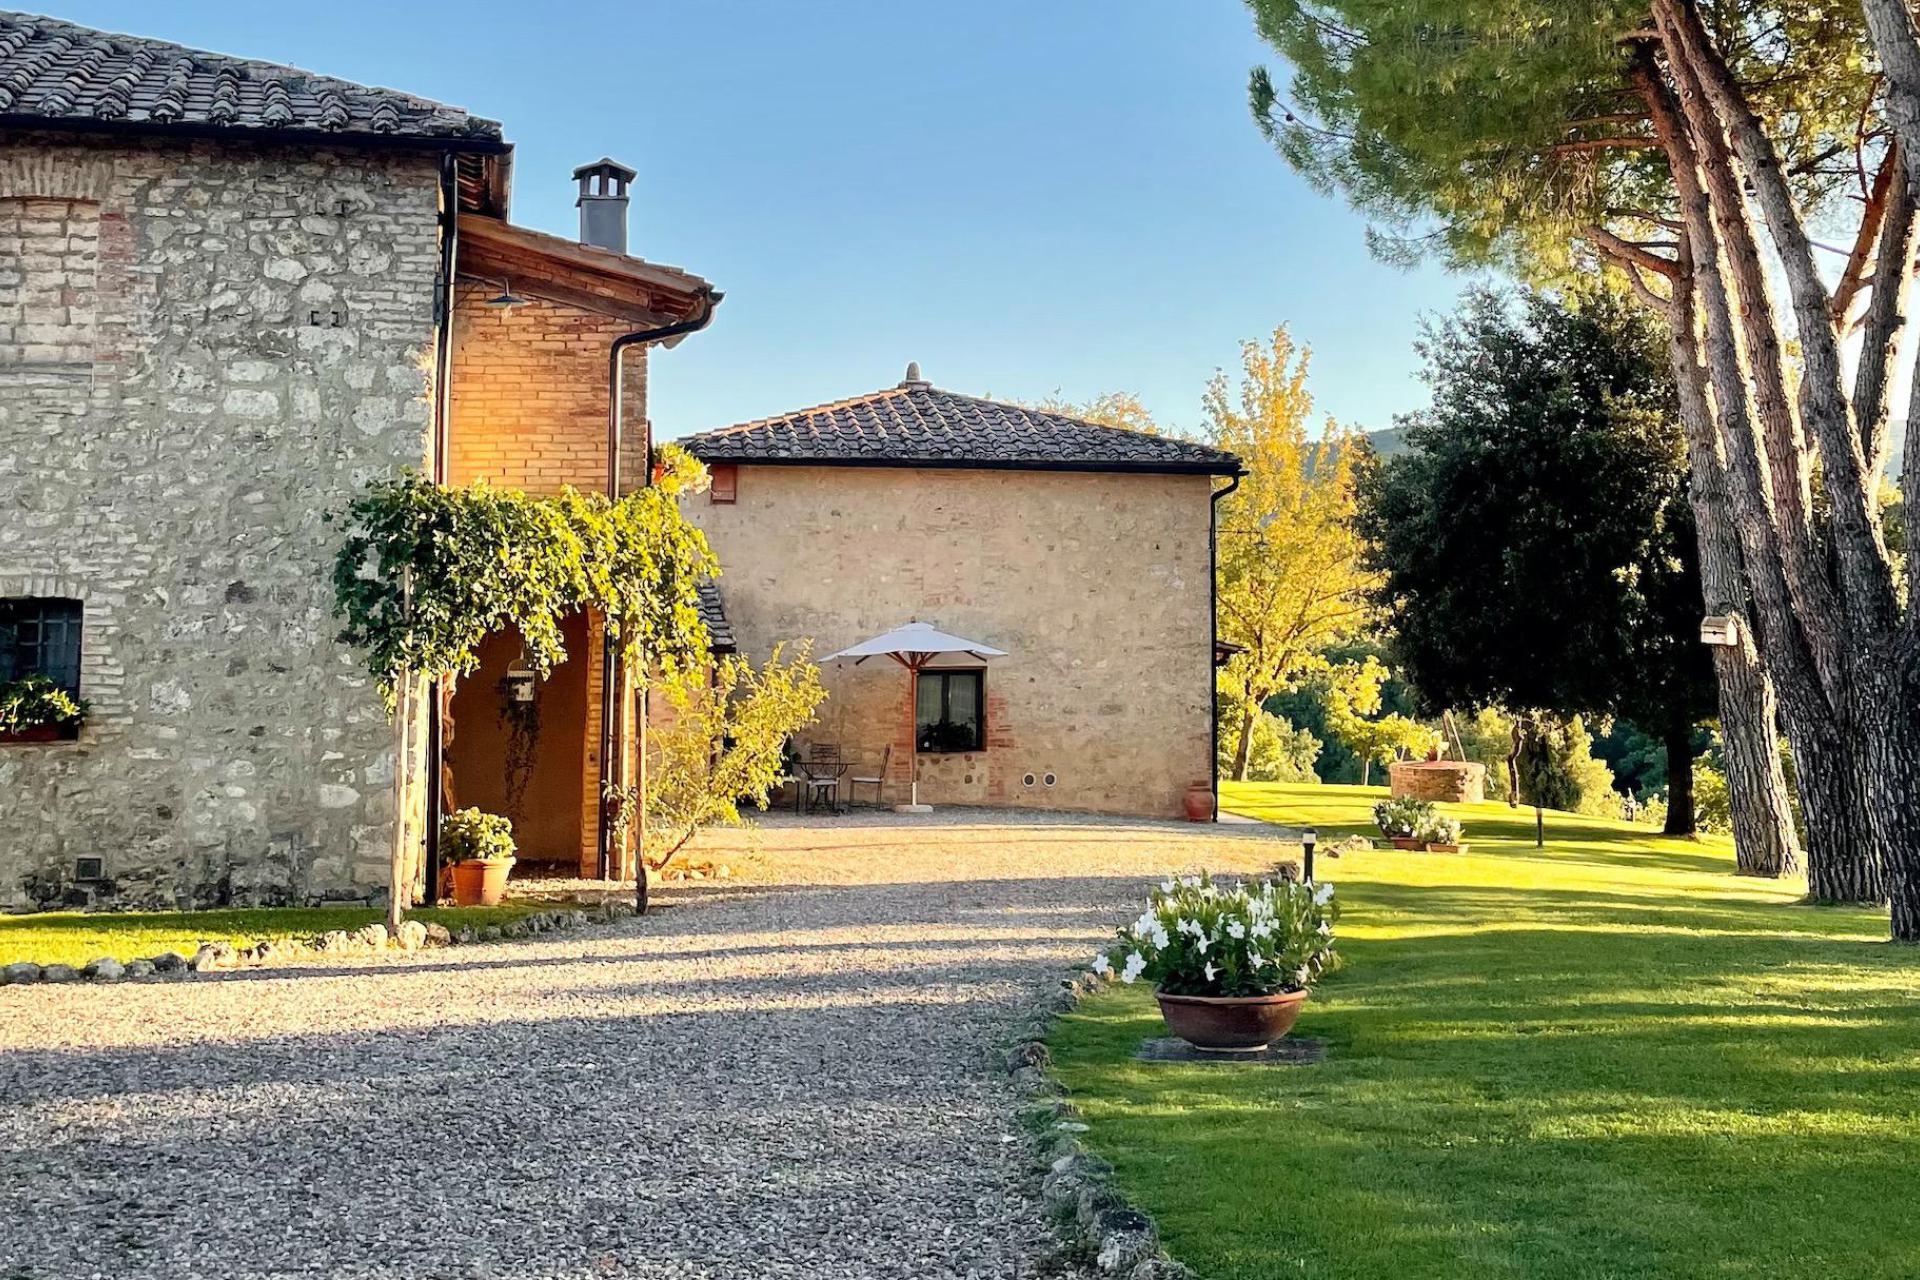 Agriturismo Tuscany Quietly situated agriturismo in Tuscany with nice views